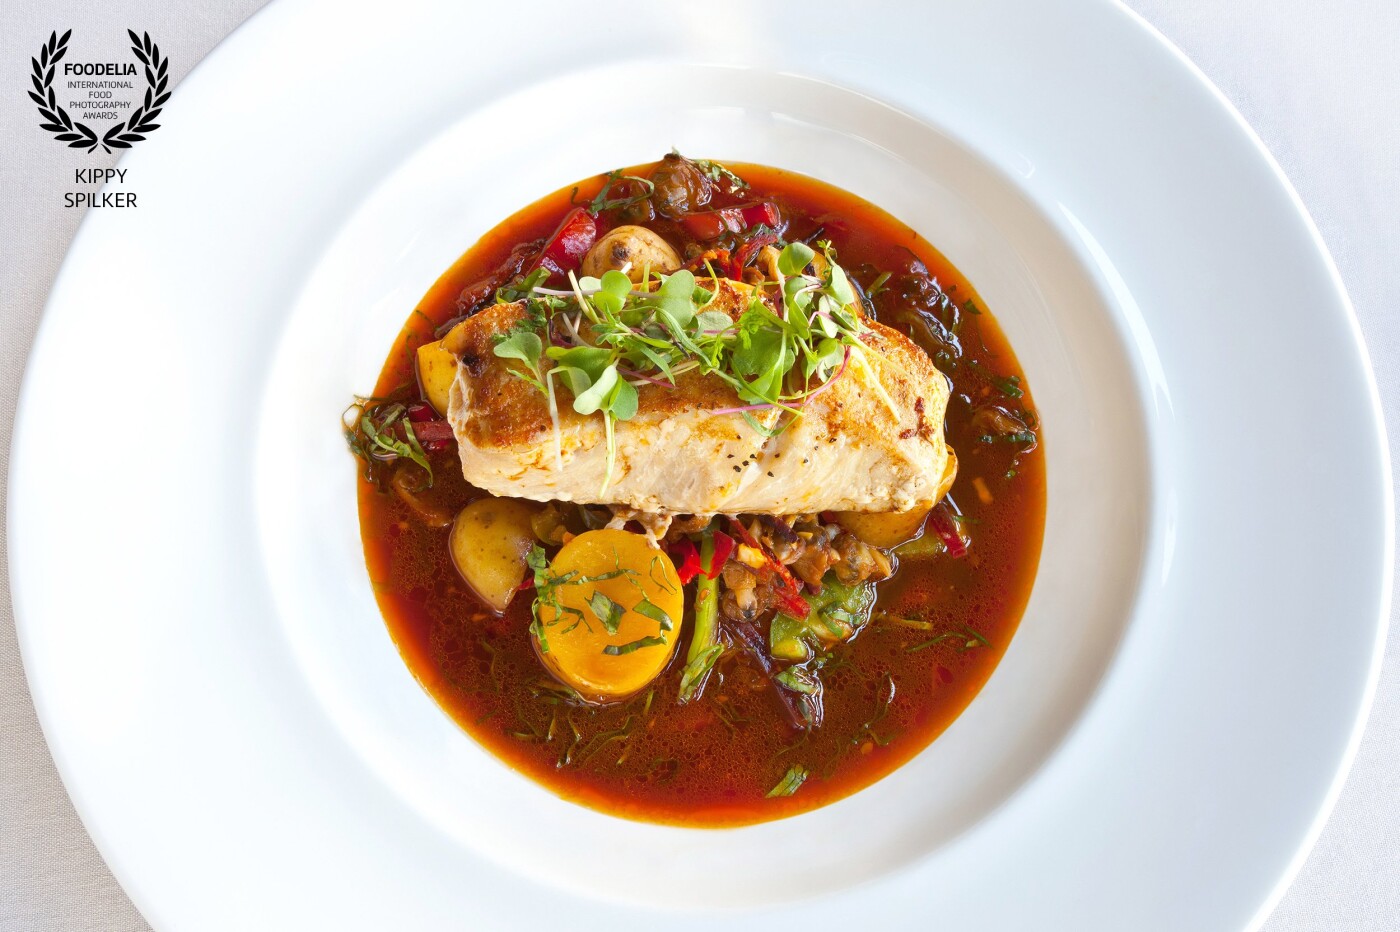 Seared California white bass, fingerling potatoes, Spanish chorizo, baby clams, peppers and Portuguese pork broth. <br />
Prepared and presented at 1862 David Walley's Hot Springs in Genoa, Nevada.